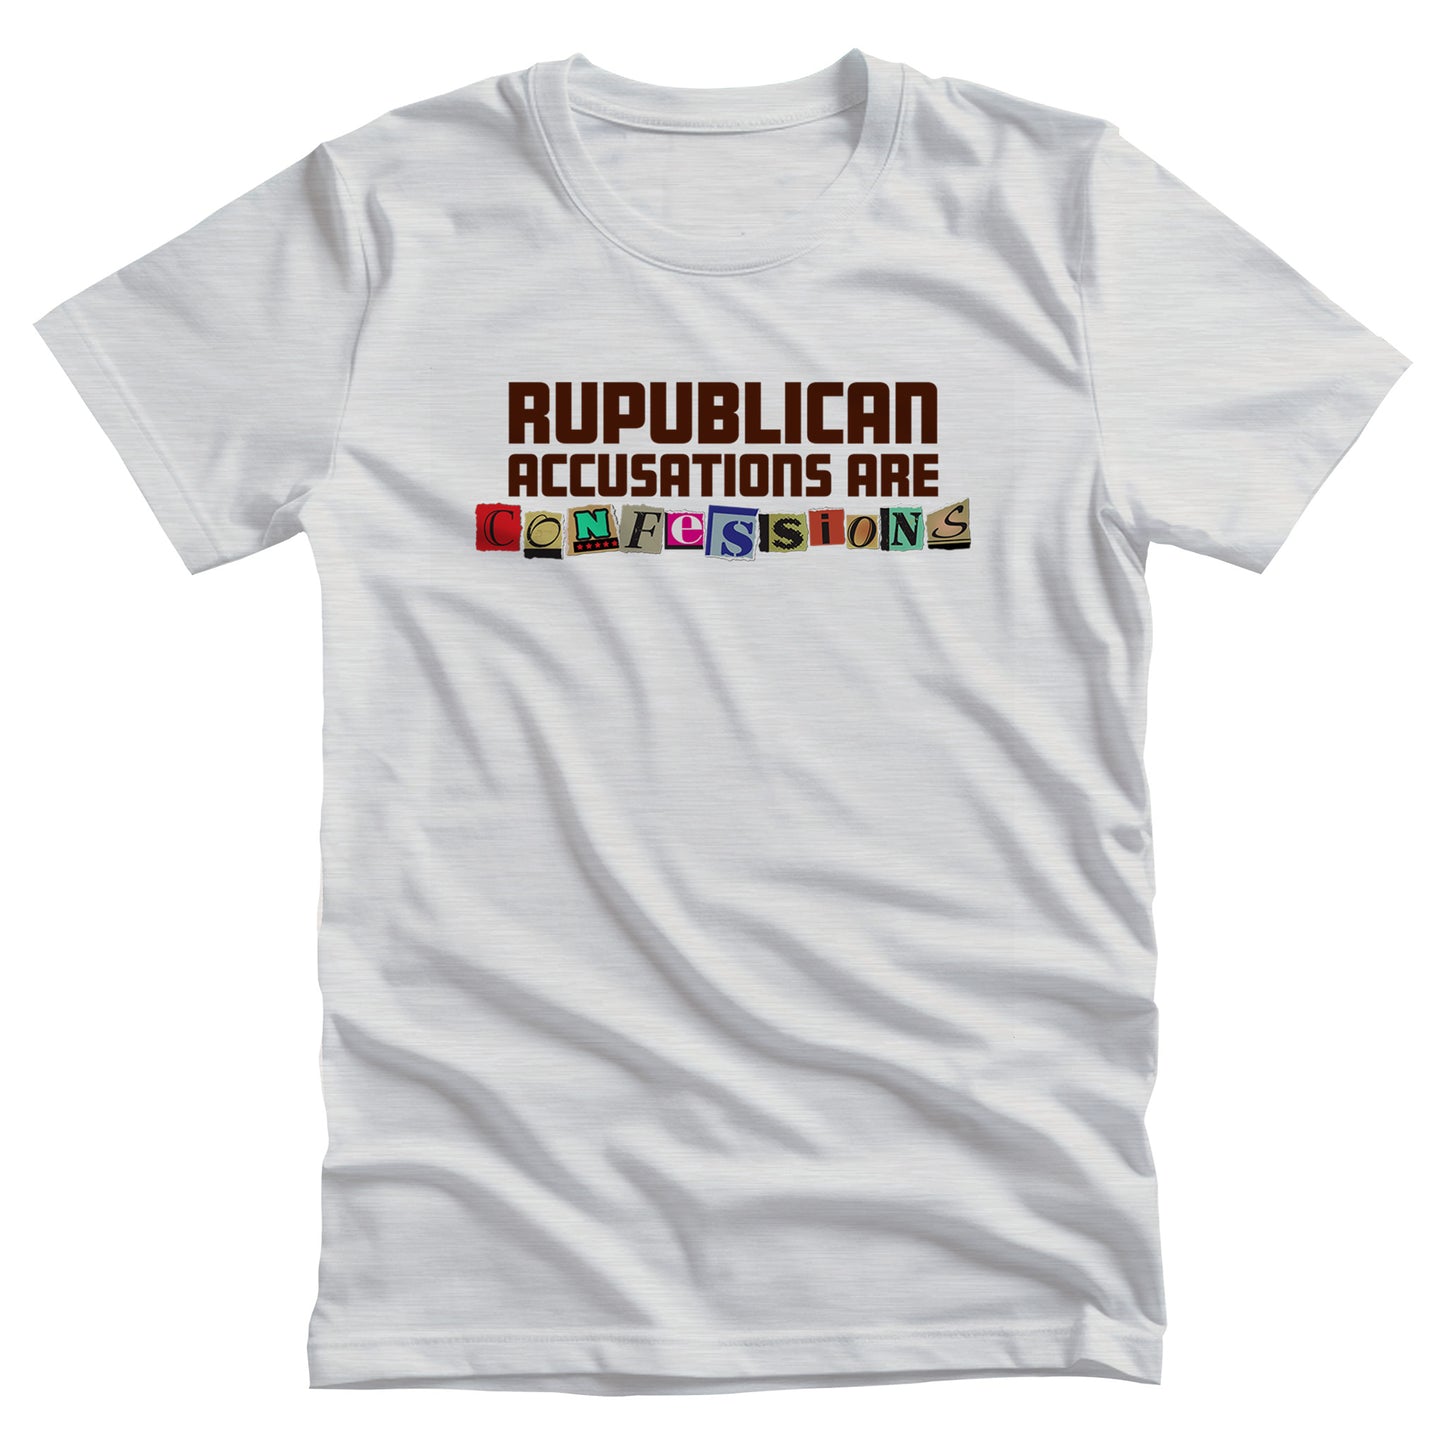 Ash color unisex t-shirt that says, “REPUBLICAN ACCUSATIONS ARE CONFESSIONS” in a block font. Each letter in “CONFESSIONS” looks like they were cut out of various magazines. 